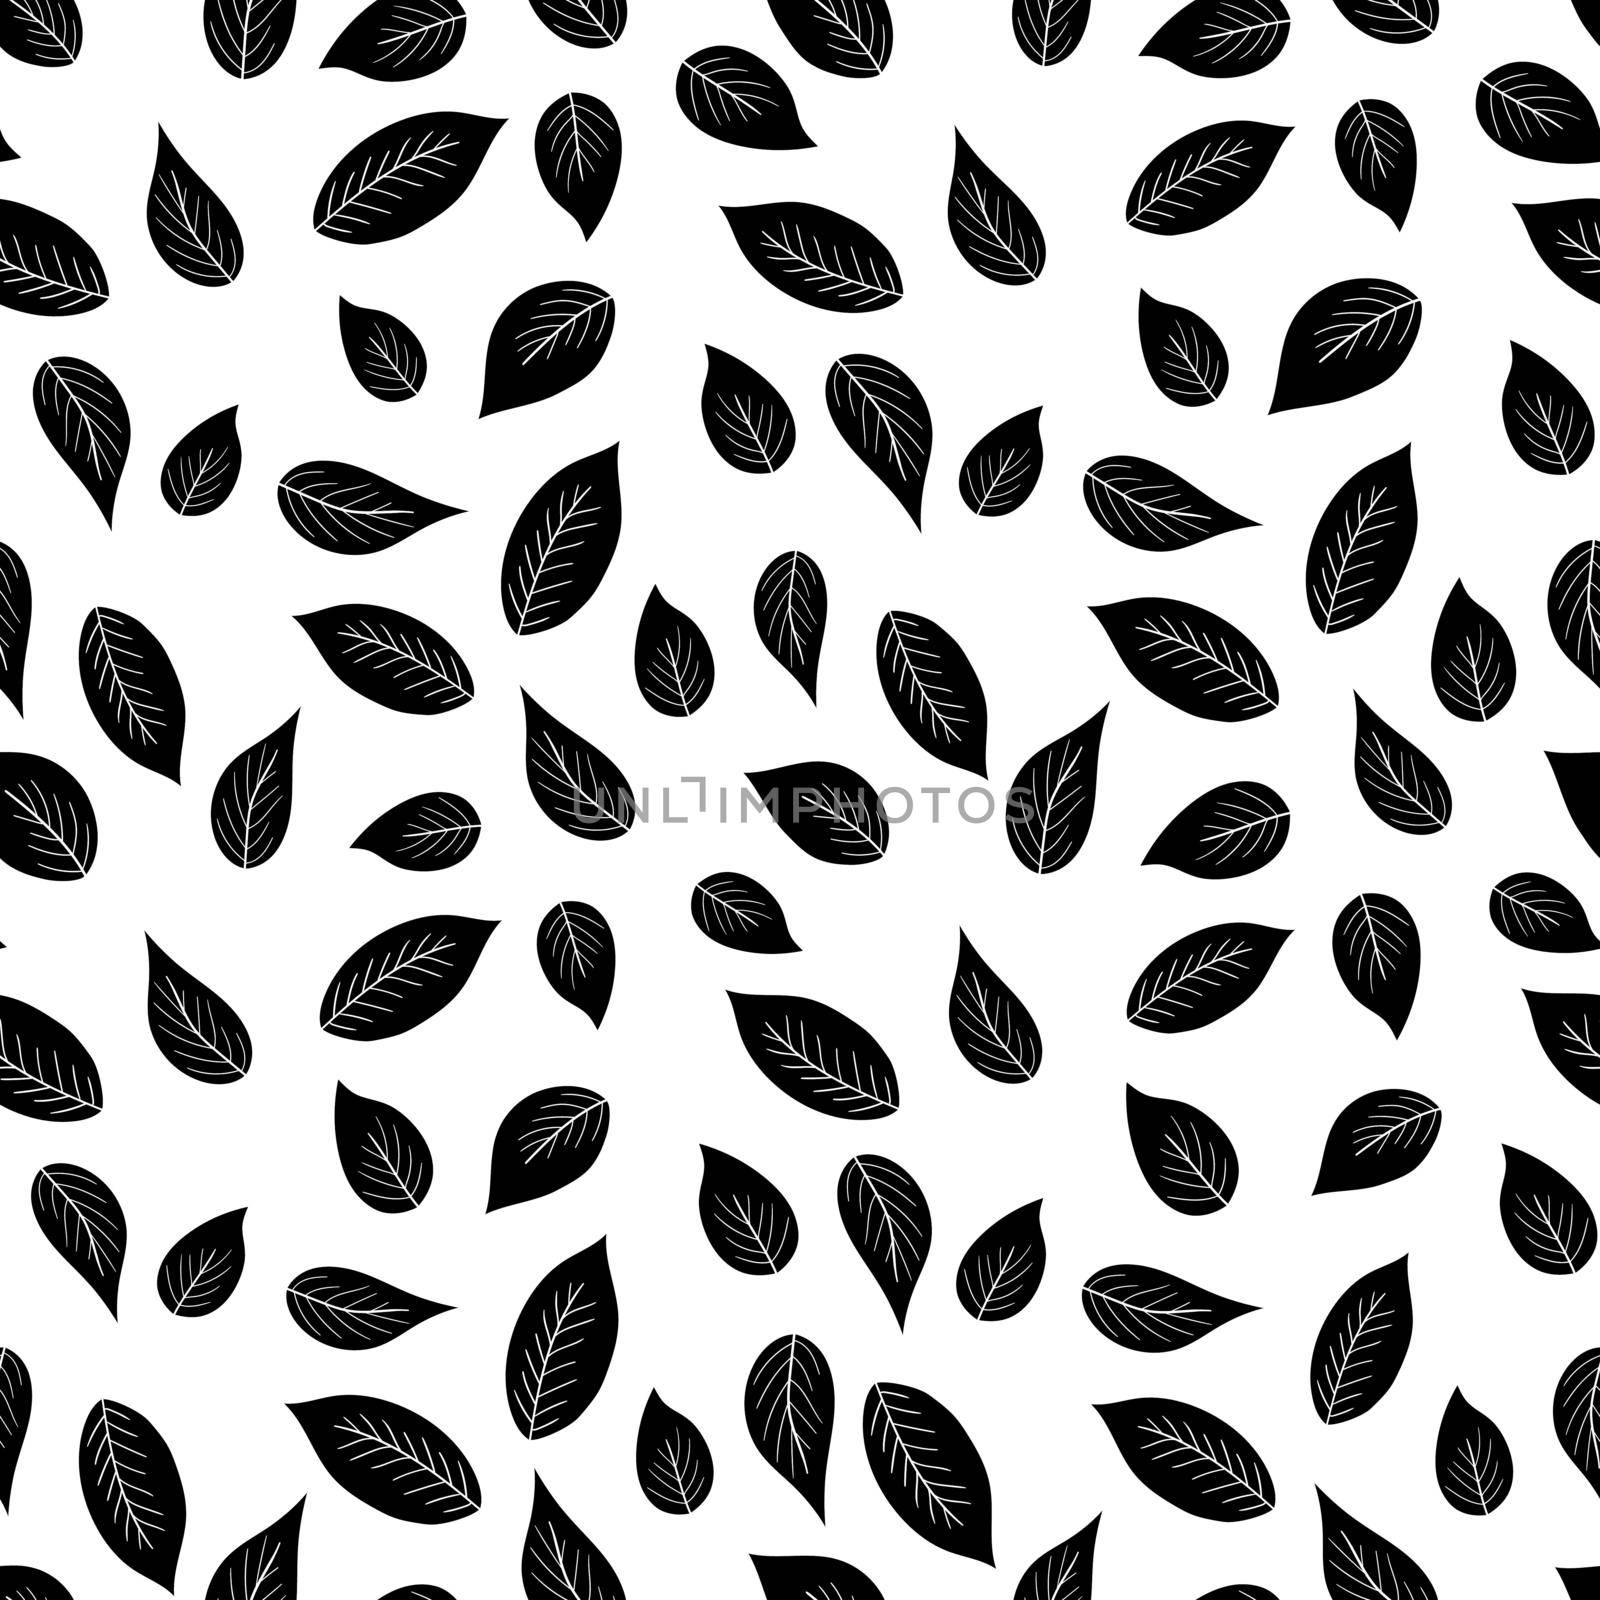 Floral seamless pattern with black silhouette leaves on white background. Tropic branches. Fashion vector stock illustration for wallpaper, posters, card, fabric, textile